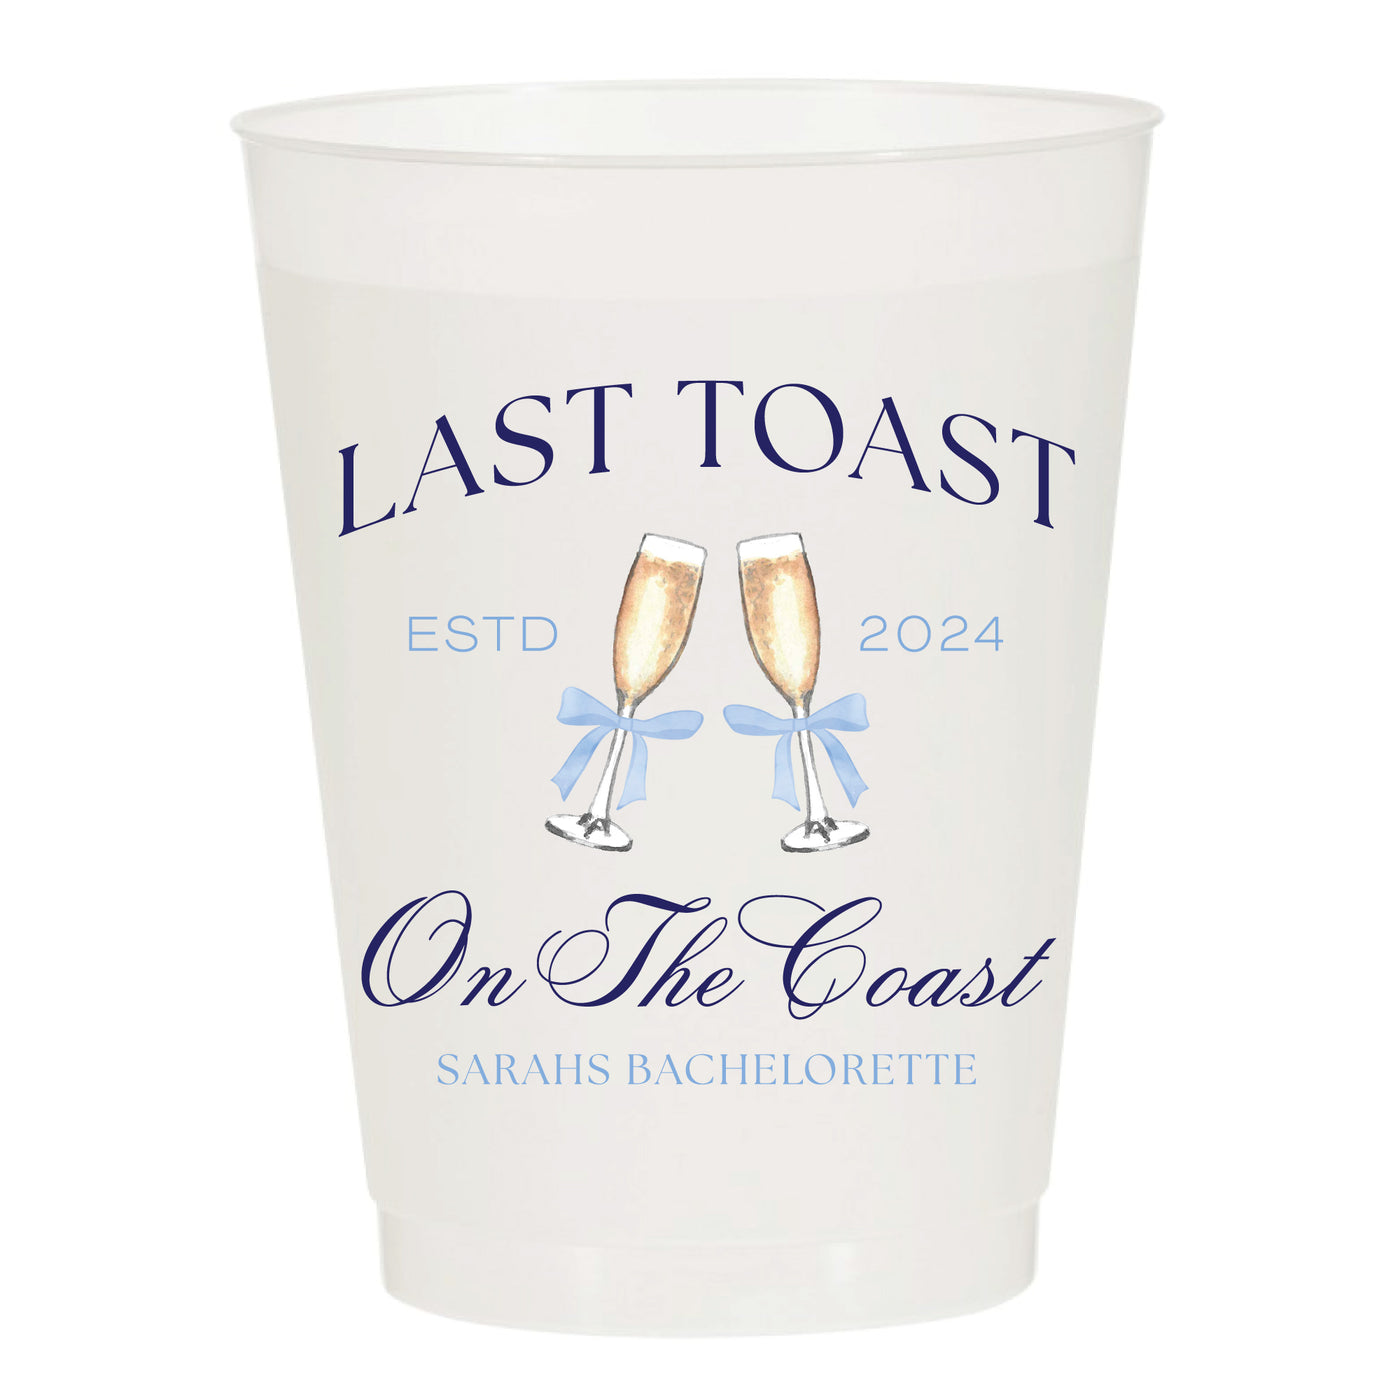 Last Toast on The Coast Bachelorette Frosted Full Color Printed Shatterproof Cups